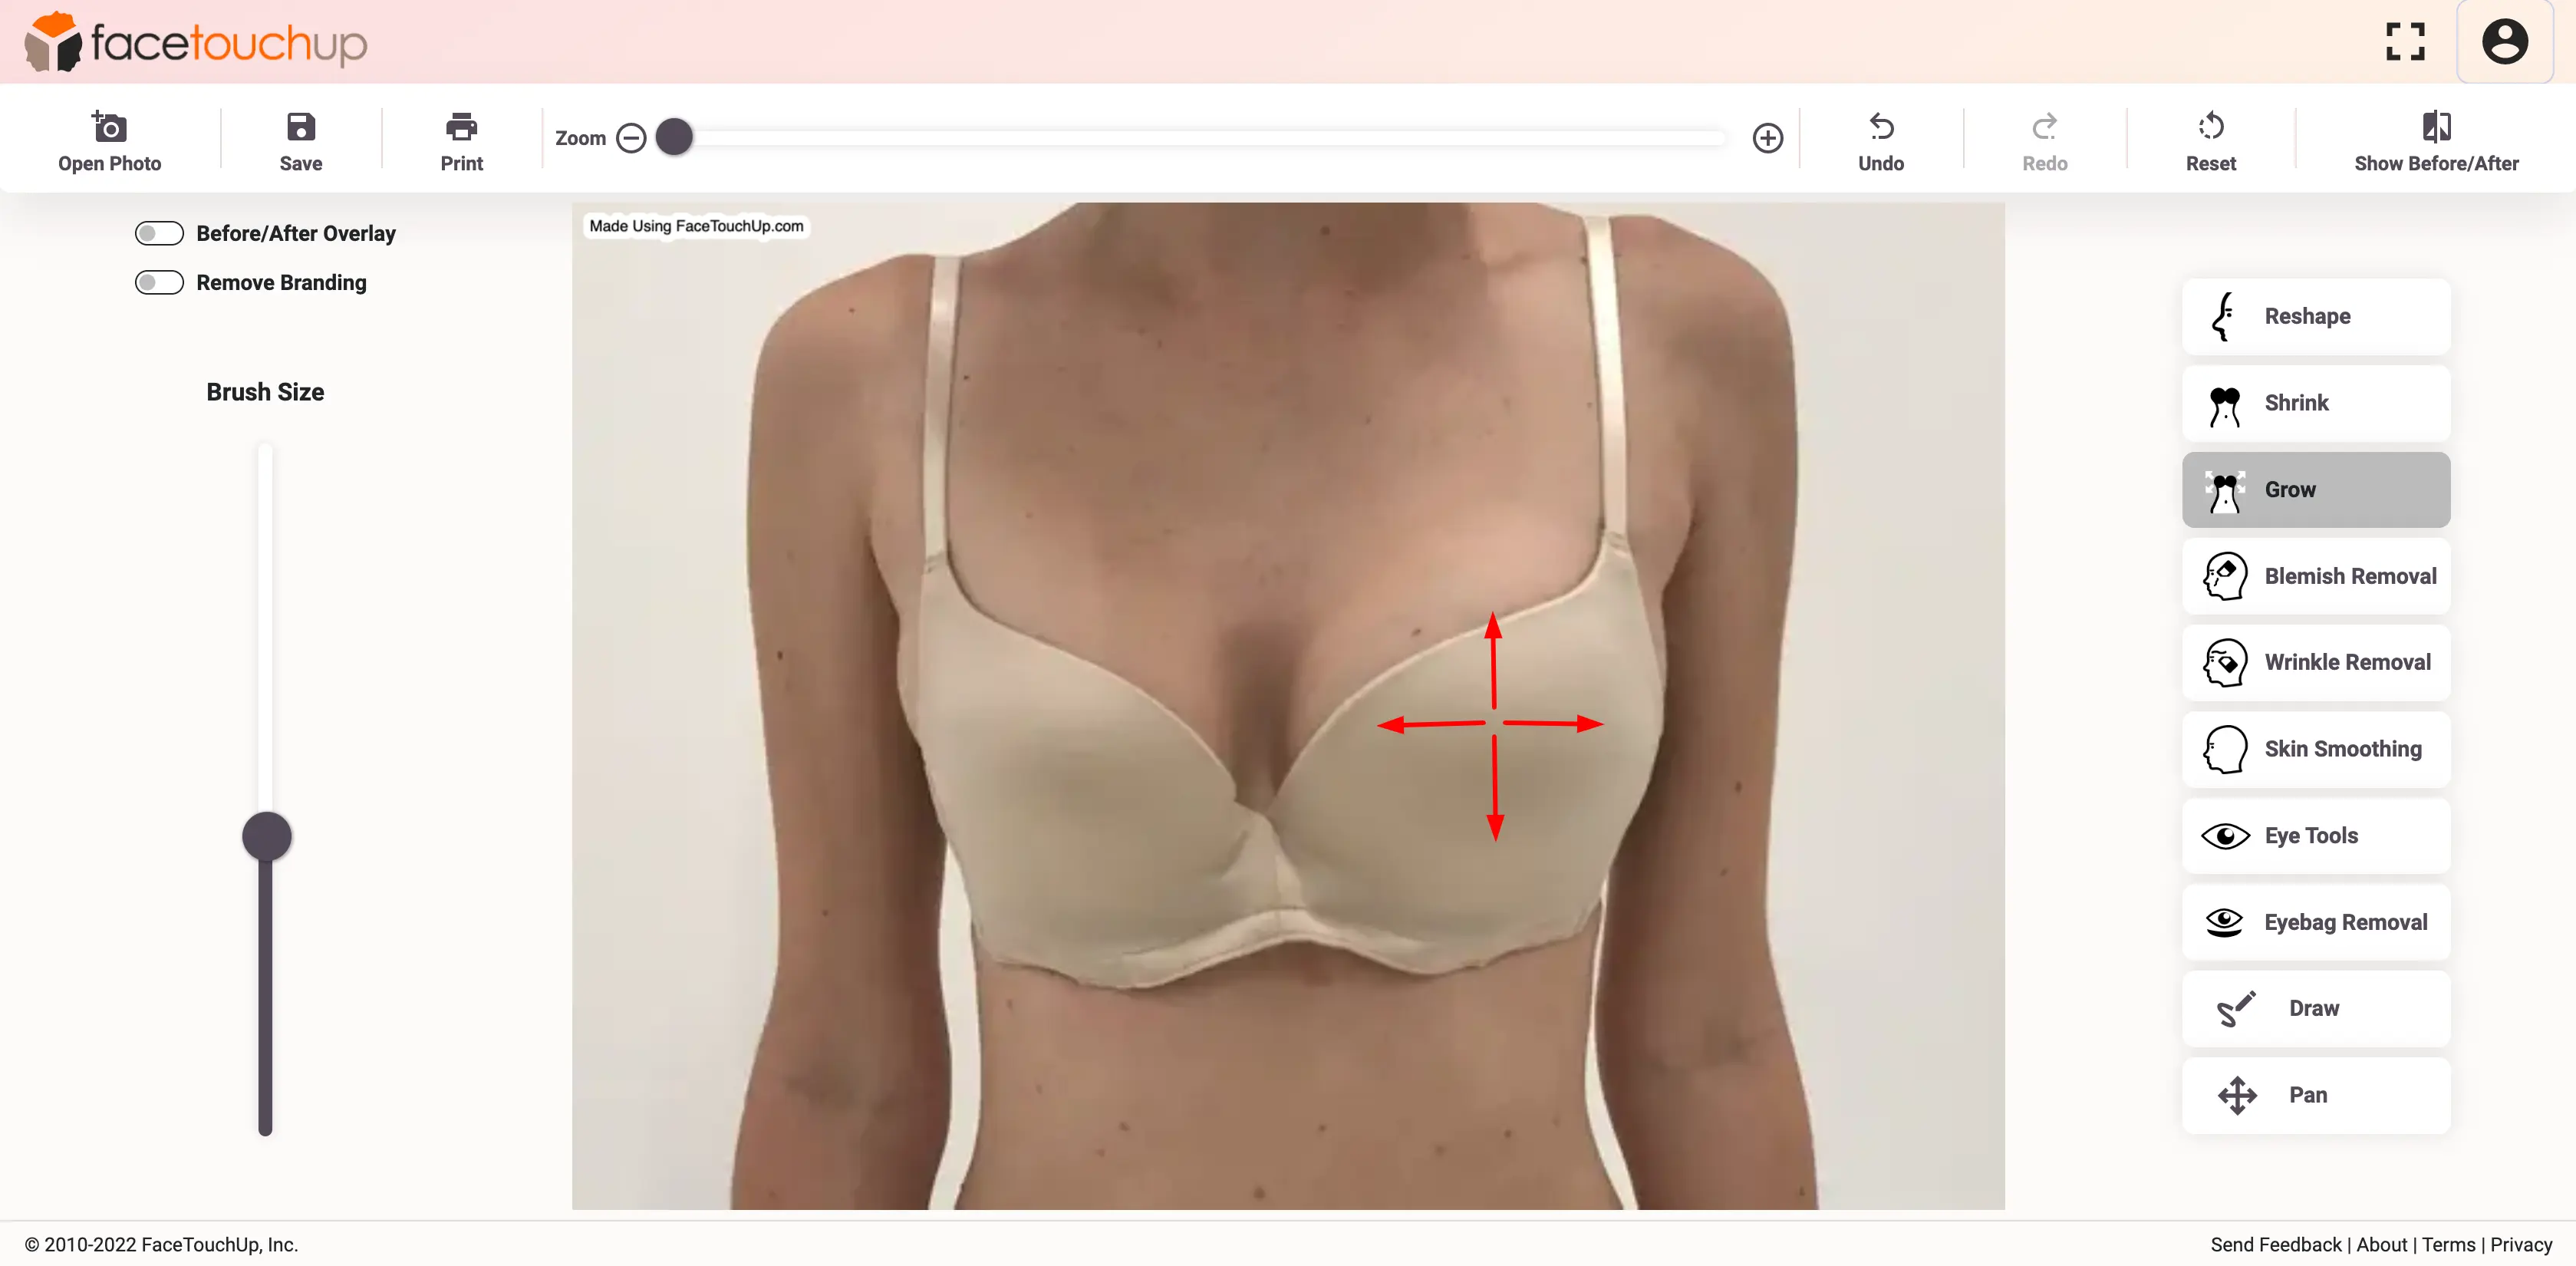 How to simulate breast augmentation surgery?